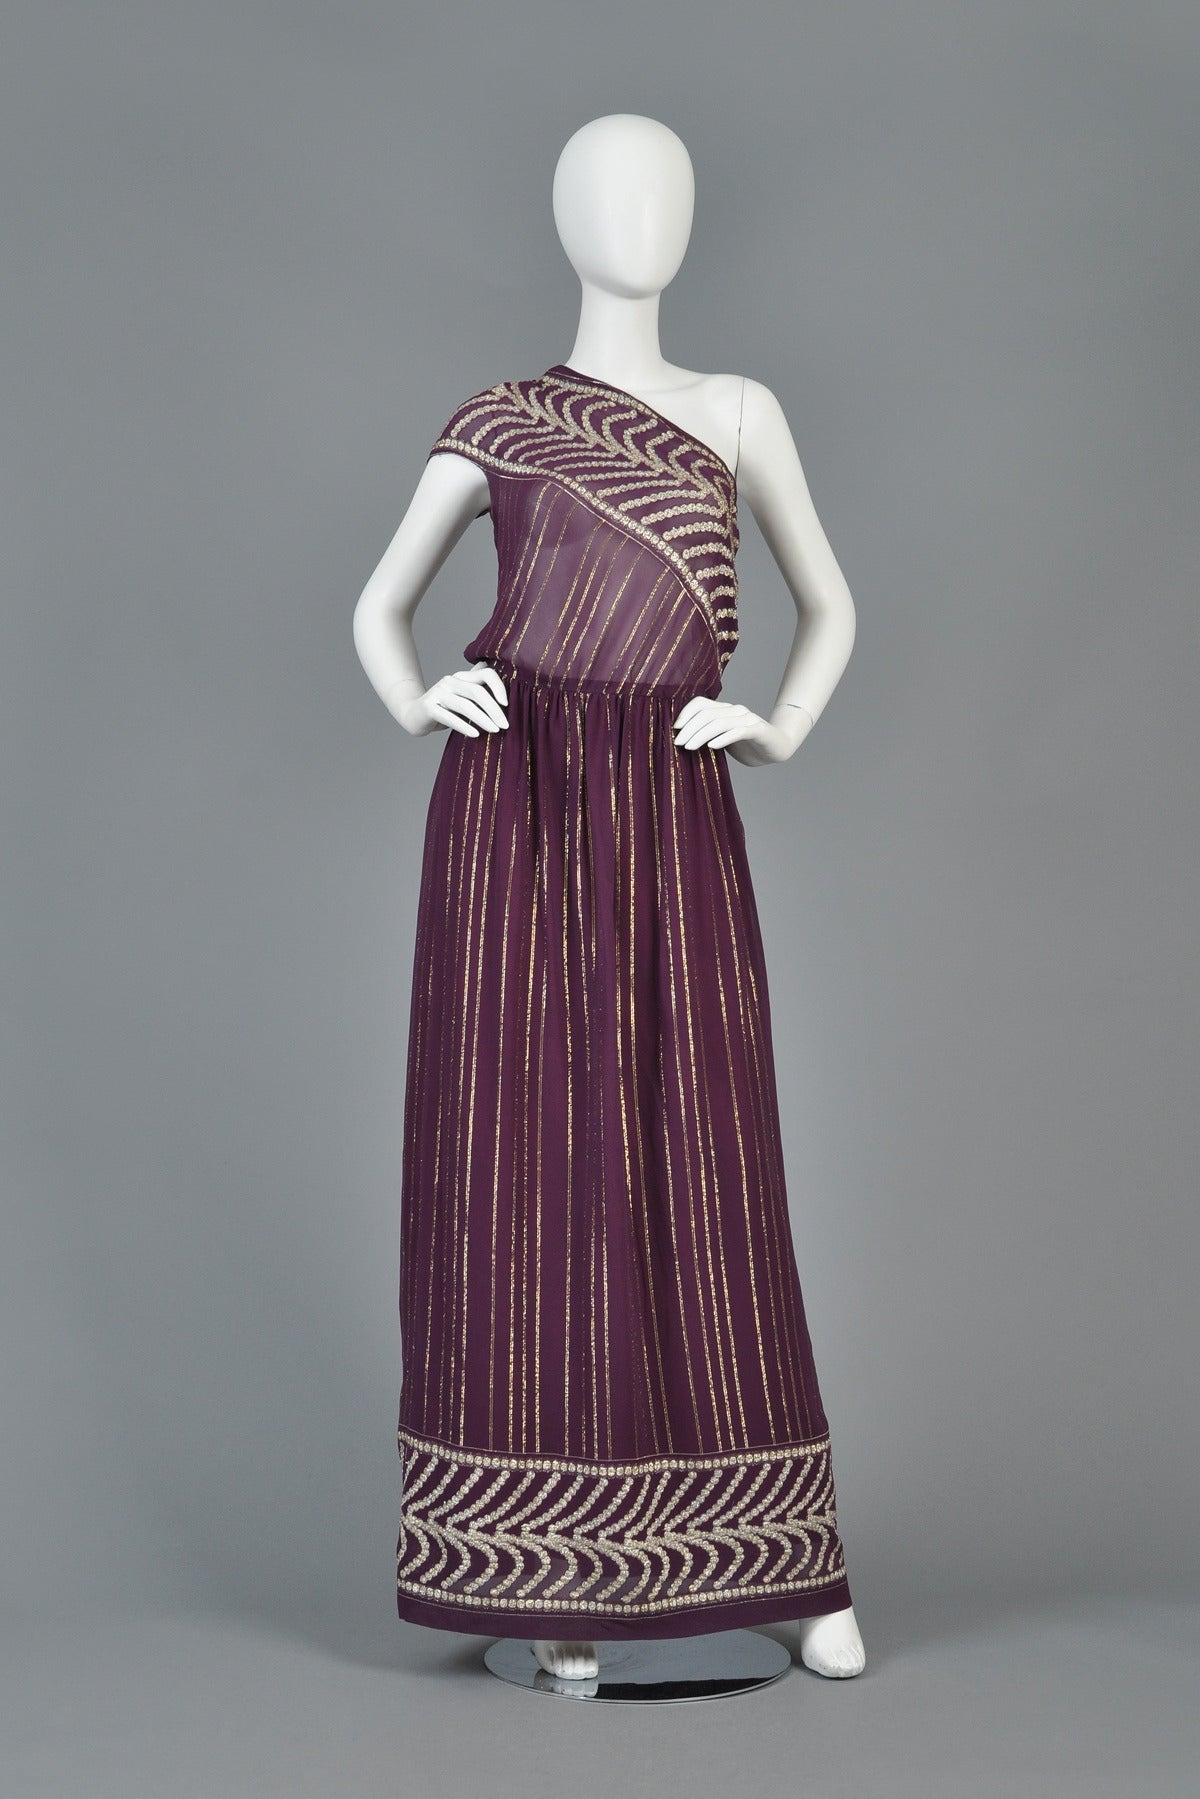 Recently reduced from $595 to $395

Beautiful 1970s Grecian inspired gown. Incredible piece! Beautiful plum-colored sheer rayon with metallic silver and gold lurex threads running throughout. Ultra sheer one-shouldered bodice with simple short